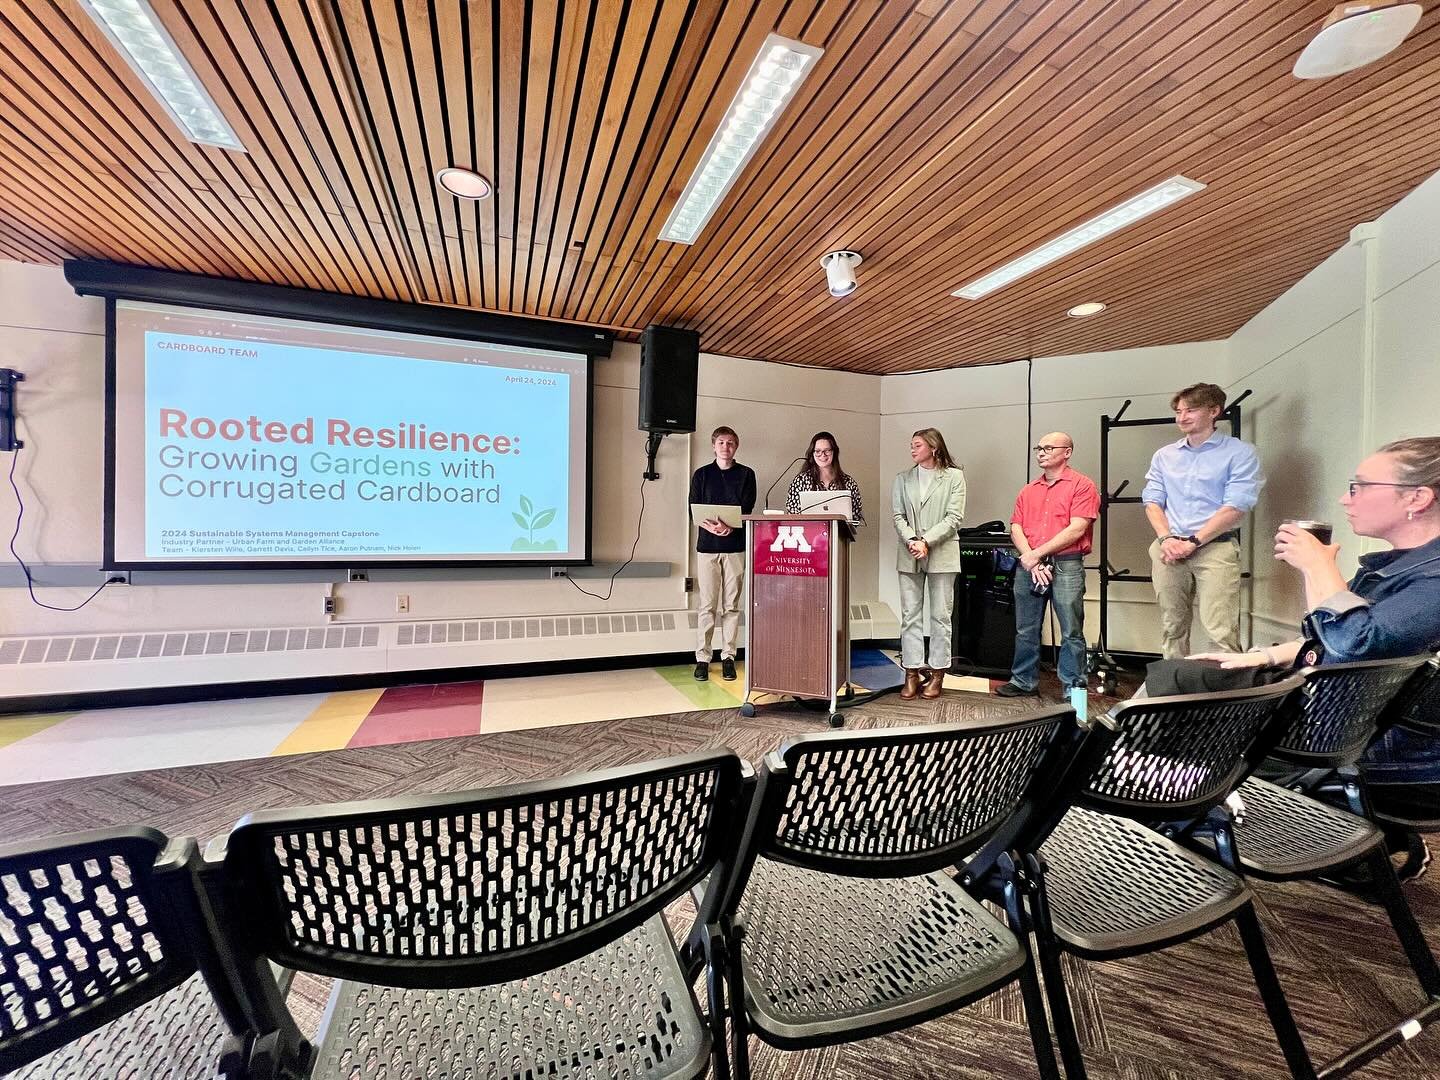 End of term means final presentations! In this case a great group of @umnbbe capstone students shared their findings for the #jelinskisoillab shredded cardboard mulch project. Thanks to their instructors, @shredright4good @rogerslab_umn @ufga_mn @ncr